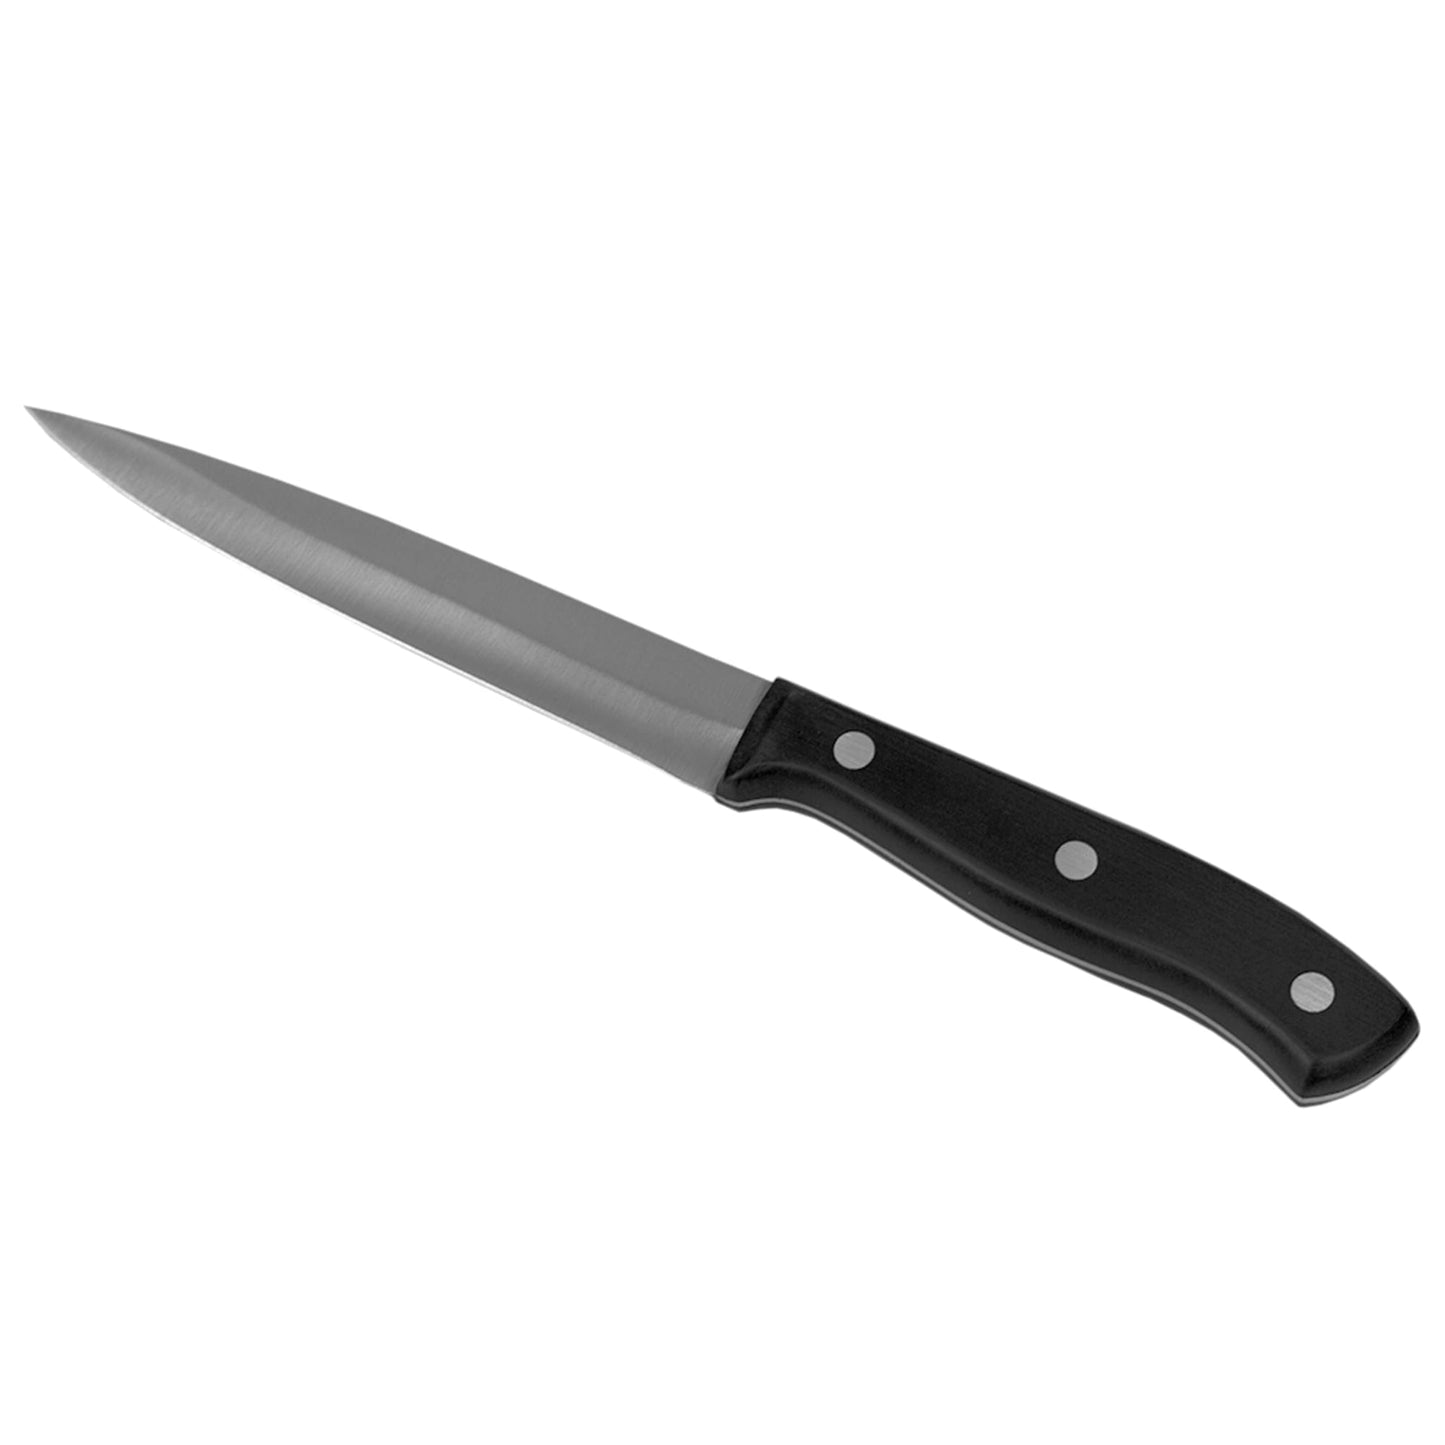 5" Stainless Steel Utility Knife with Contoured Bakelite Handle, Black